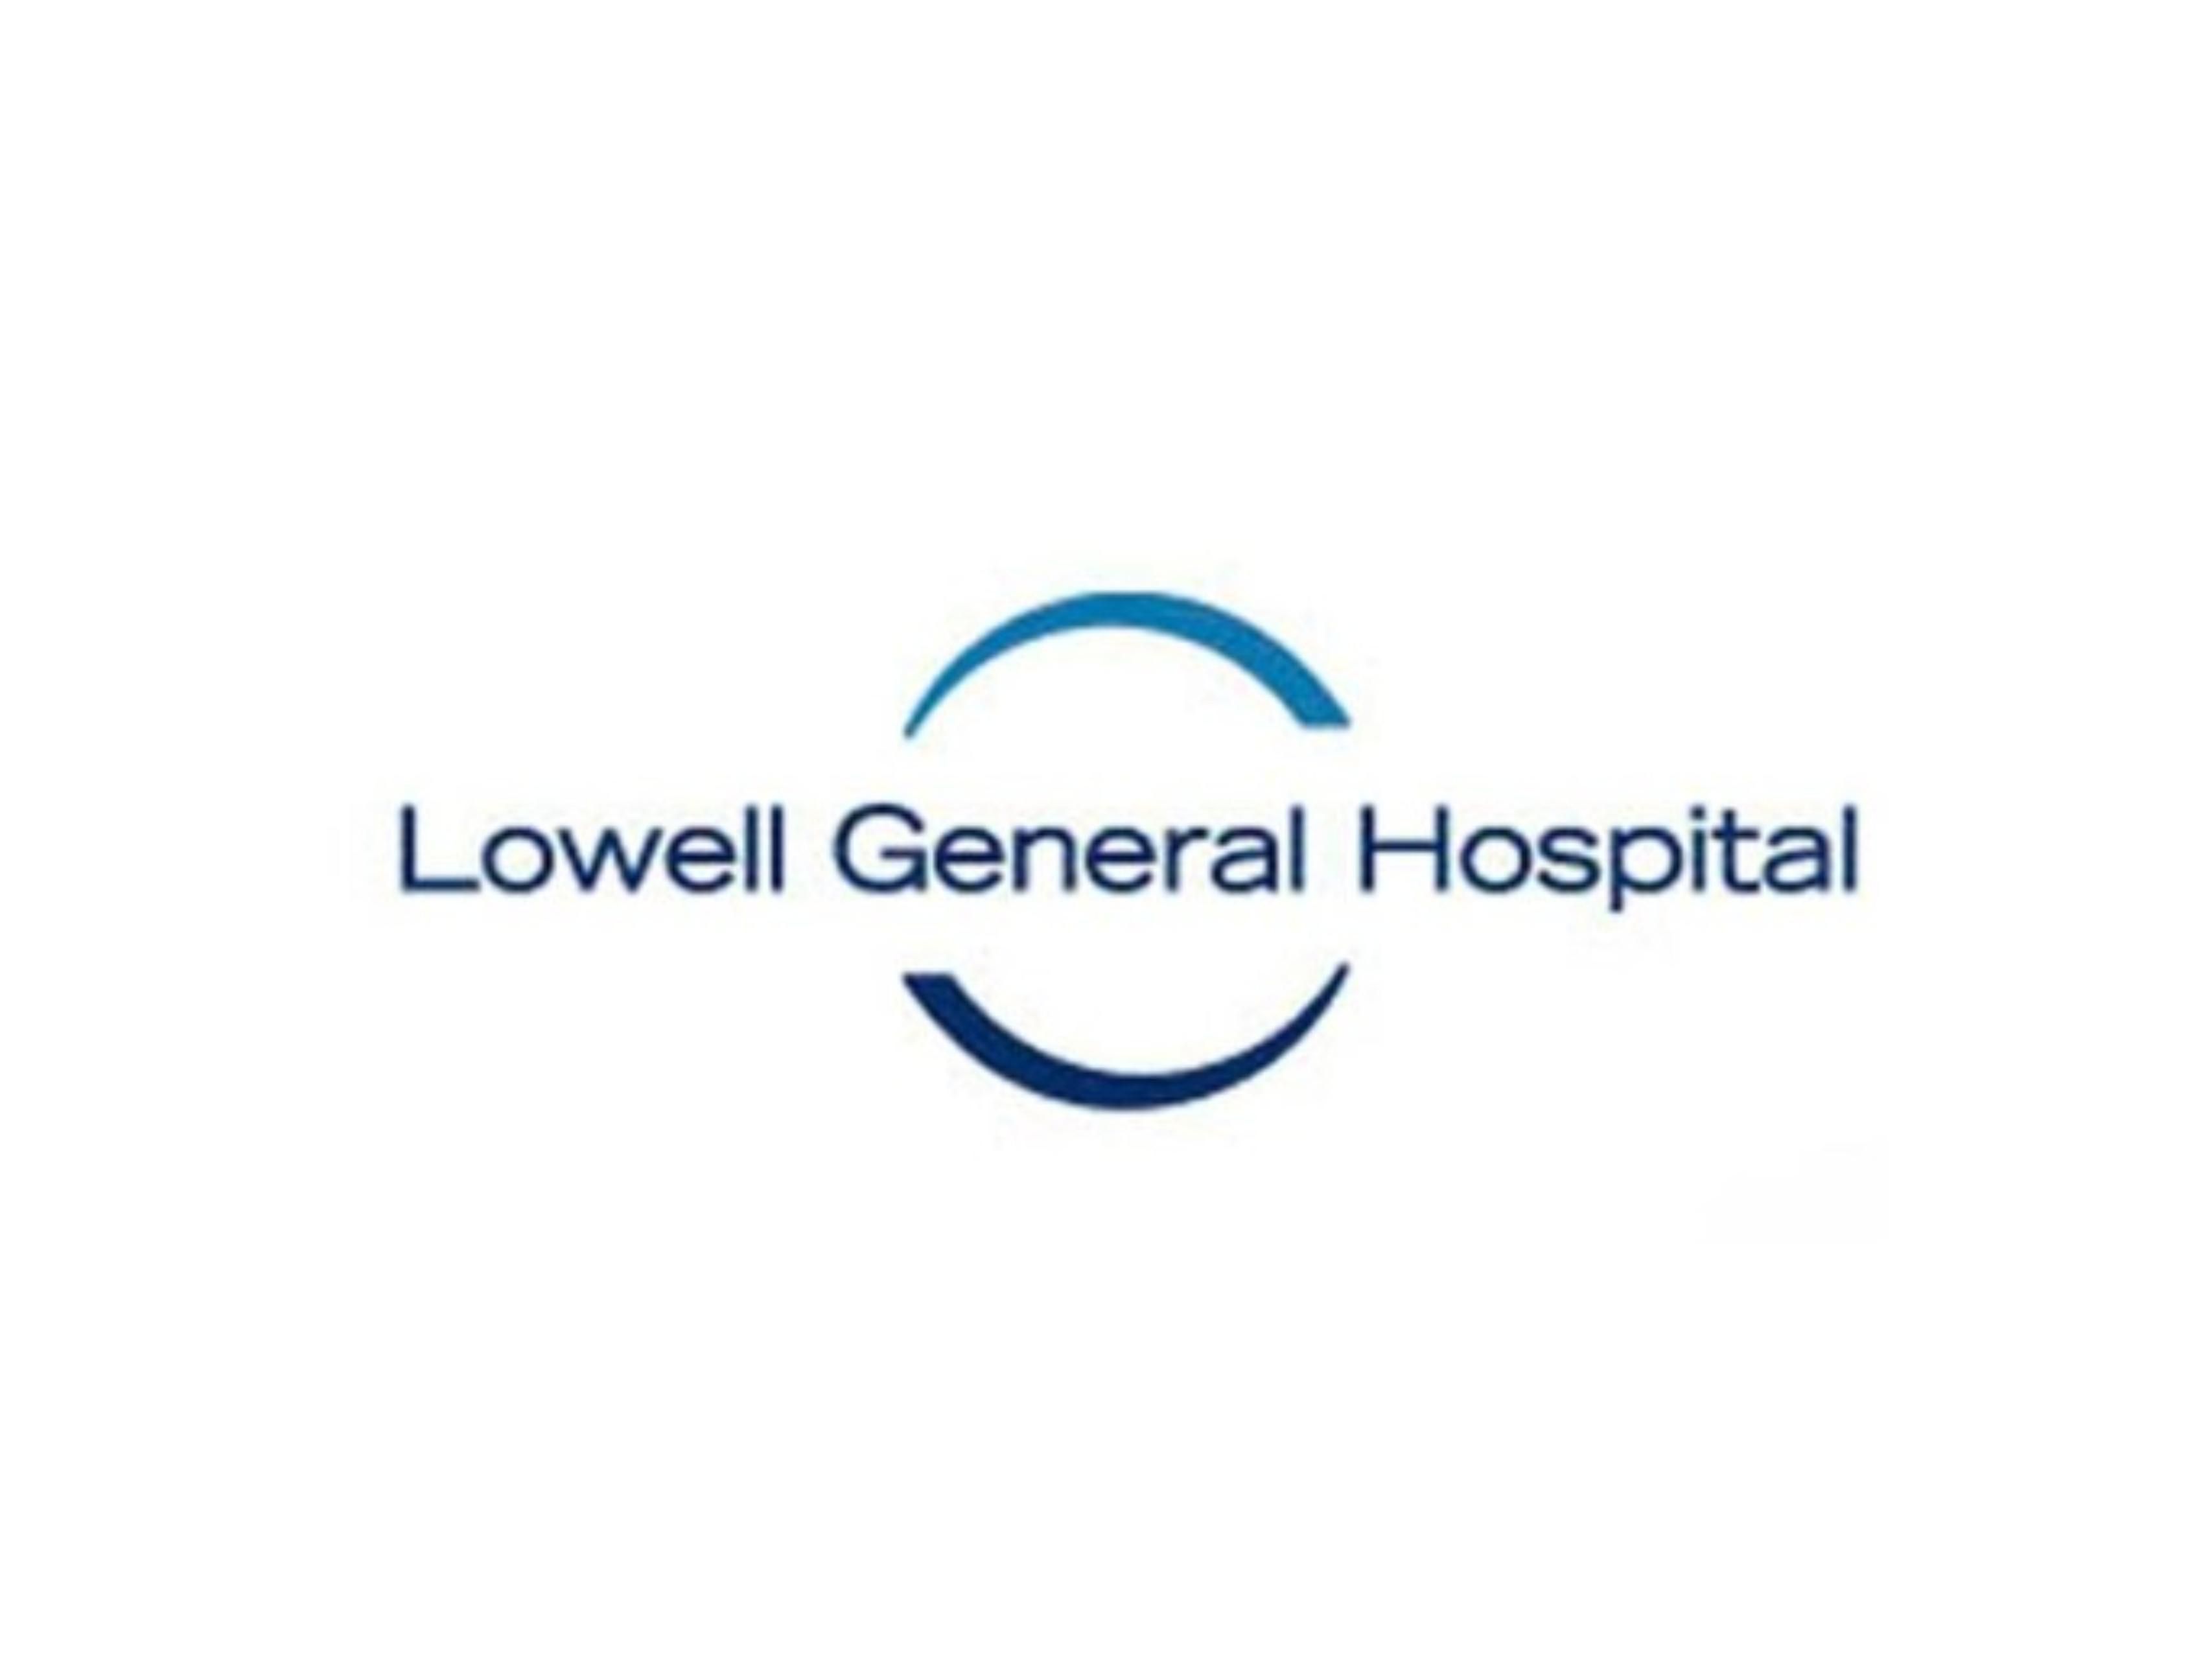 Lowell General Hospital Rate